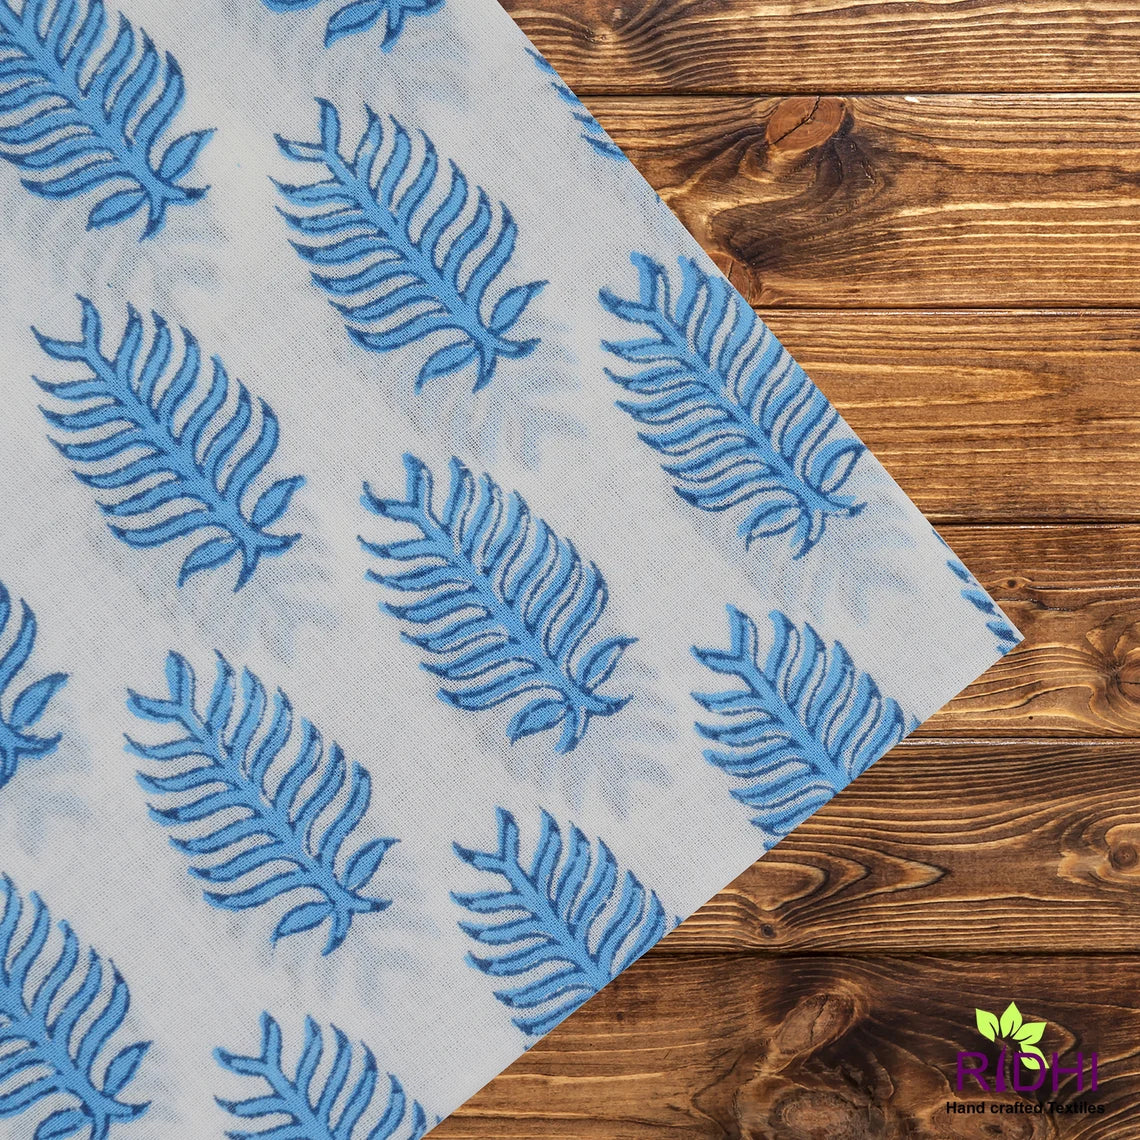 Cerulean Blue and White Indian Hand Block Leaf Printed 100% Pure Cotton Cloth Napkins, Gifts, 9x9"- Cocktail Napkins, 20x20"- Dinner Napkins